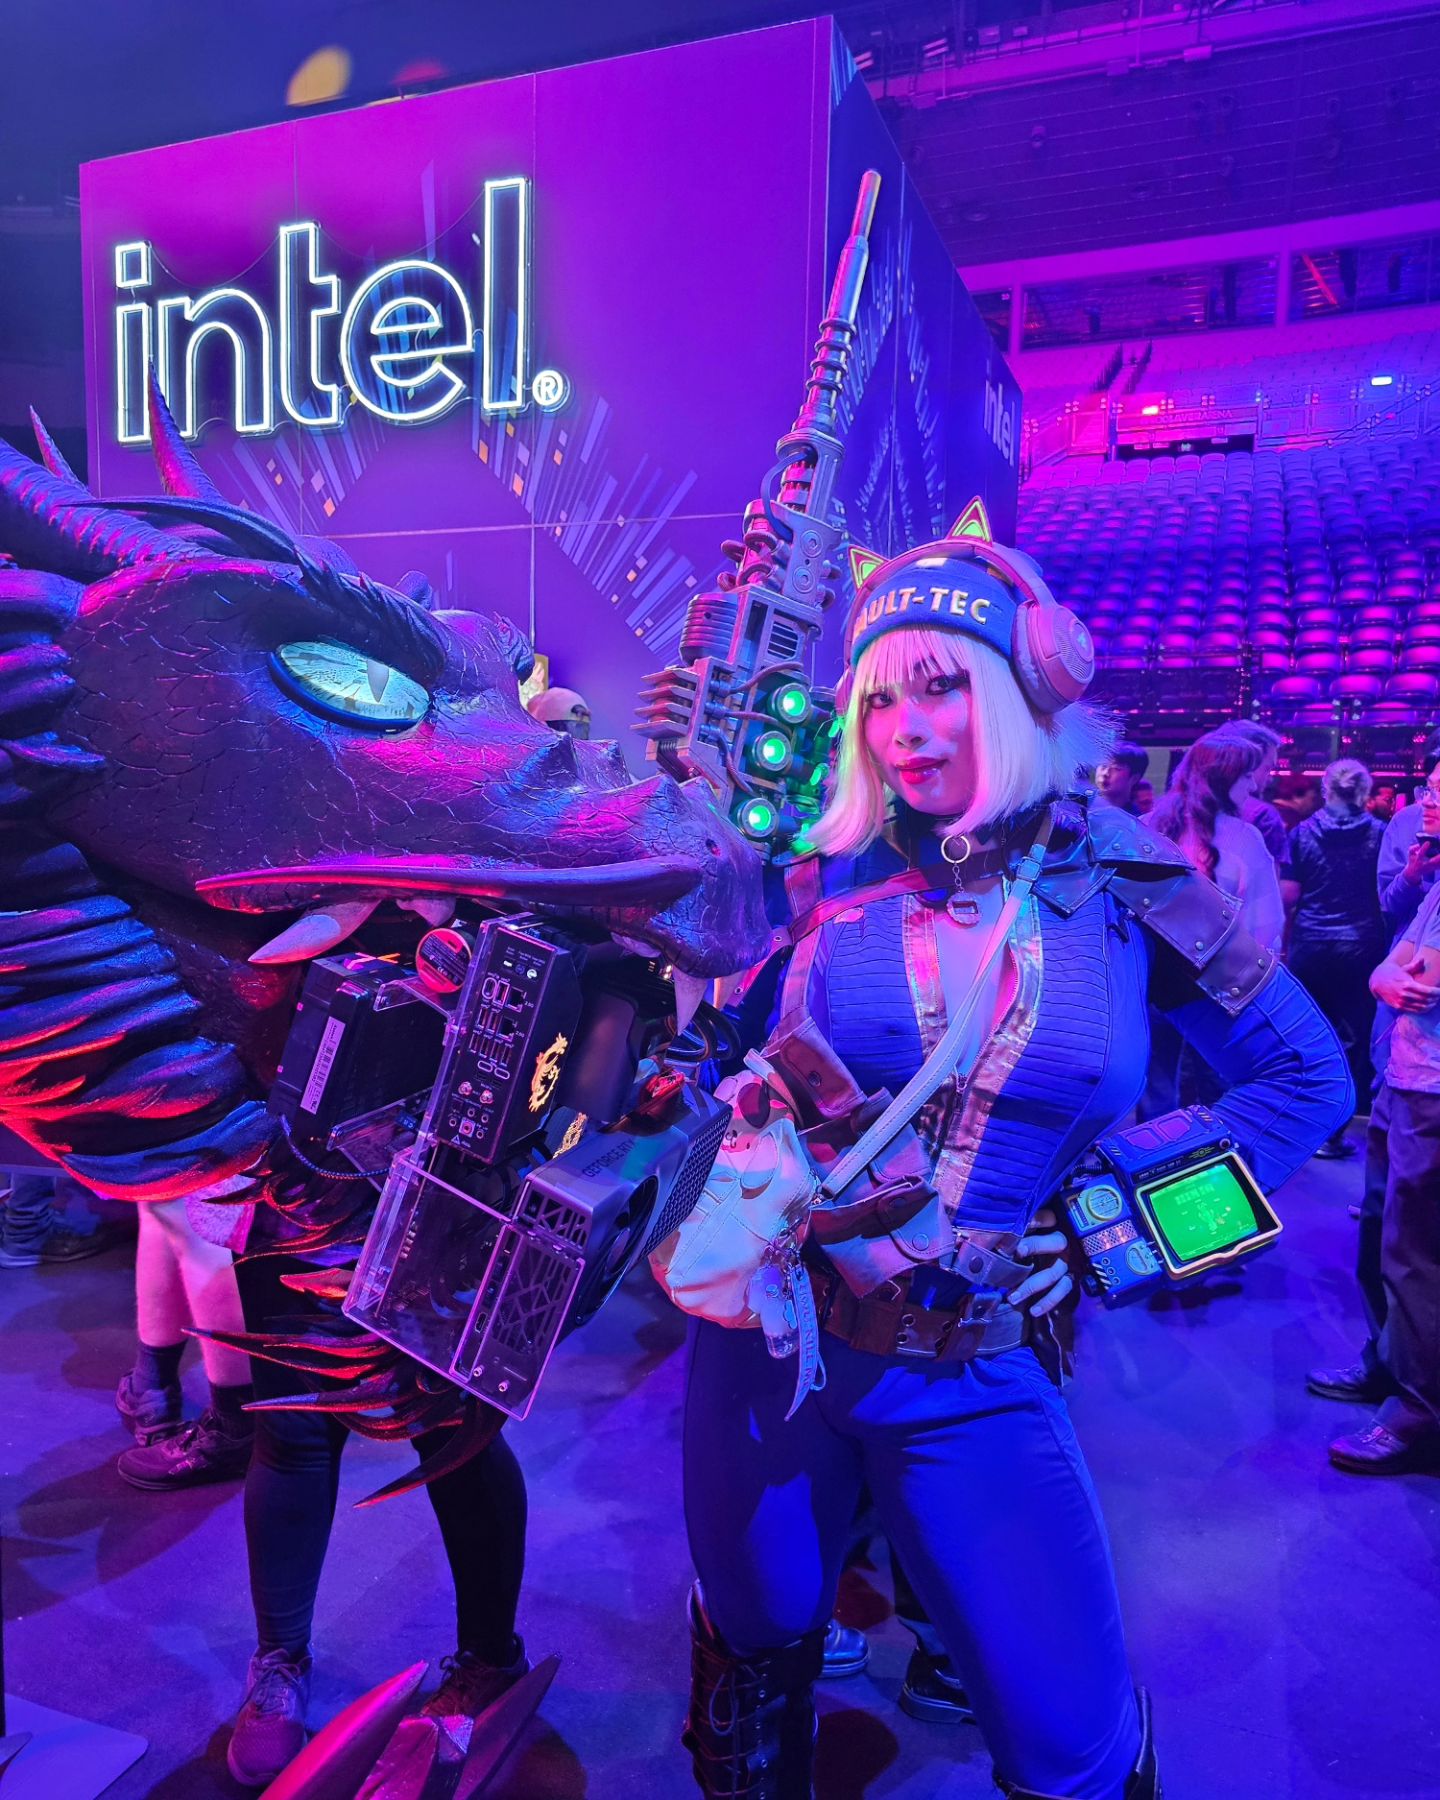 Dragon PC!!!

@msigaming_anz @dreamhackau 

#msiandcentrecom #yearofthedragonpc #fallout4 #fallout3 #fallout #fallout76 #falloutamazonprime #falloutnewvegas #falloutcosplay #gaming #PC #pcgaming #yt #cosplay #cosplayers #cosplaying #cosplaygirl #vaulttec #vaultgirl #vaultgirlcosplay #vaultdweller #bethesda